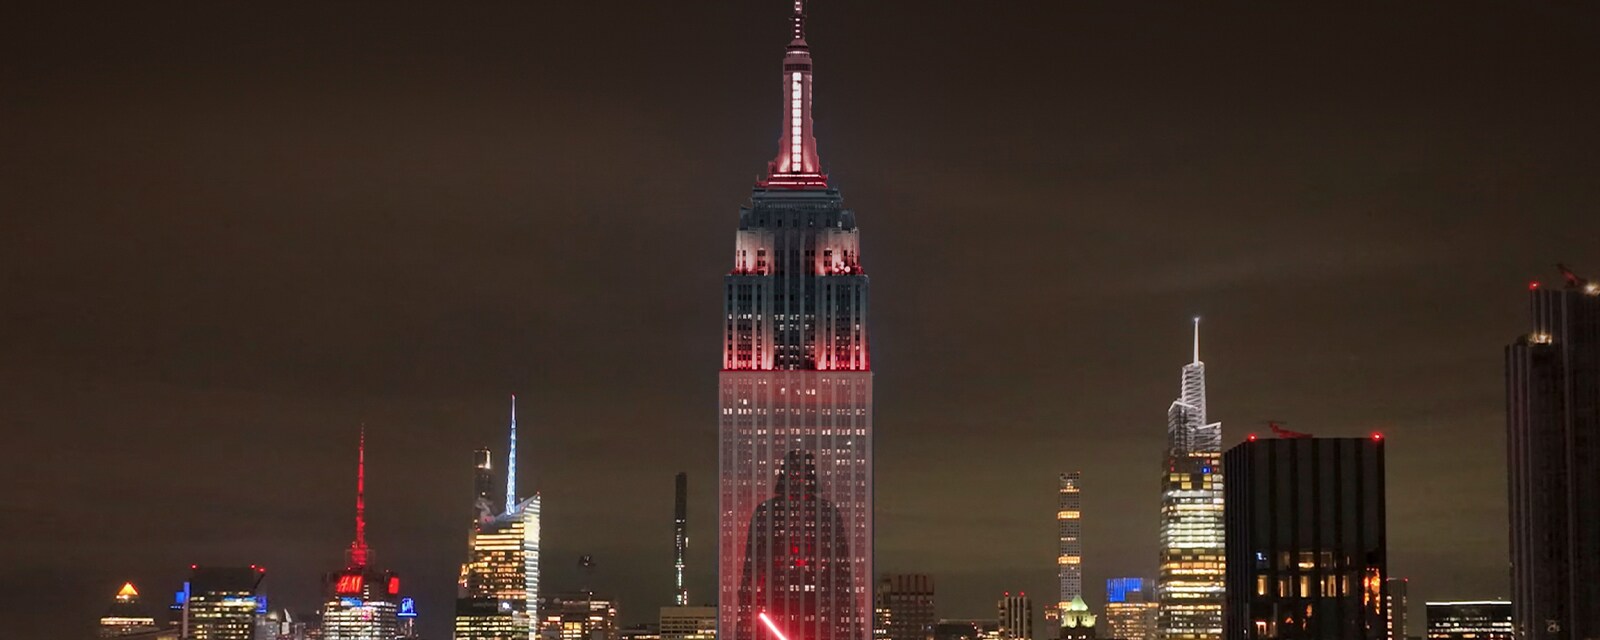 The Empire State Building's dynamic light show for "Imperial March"